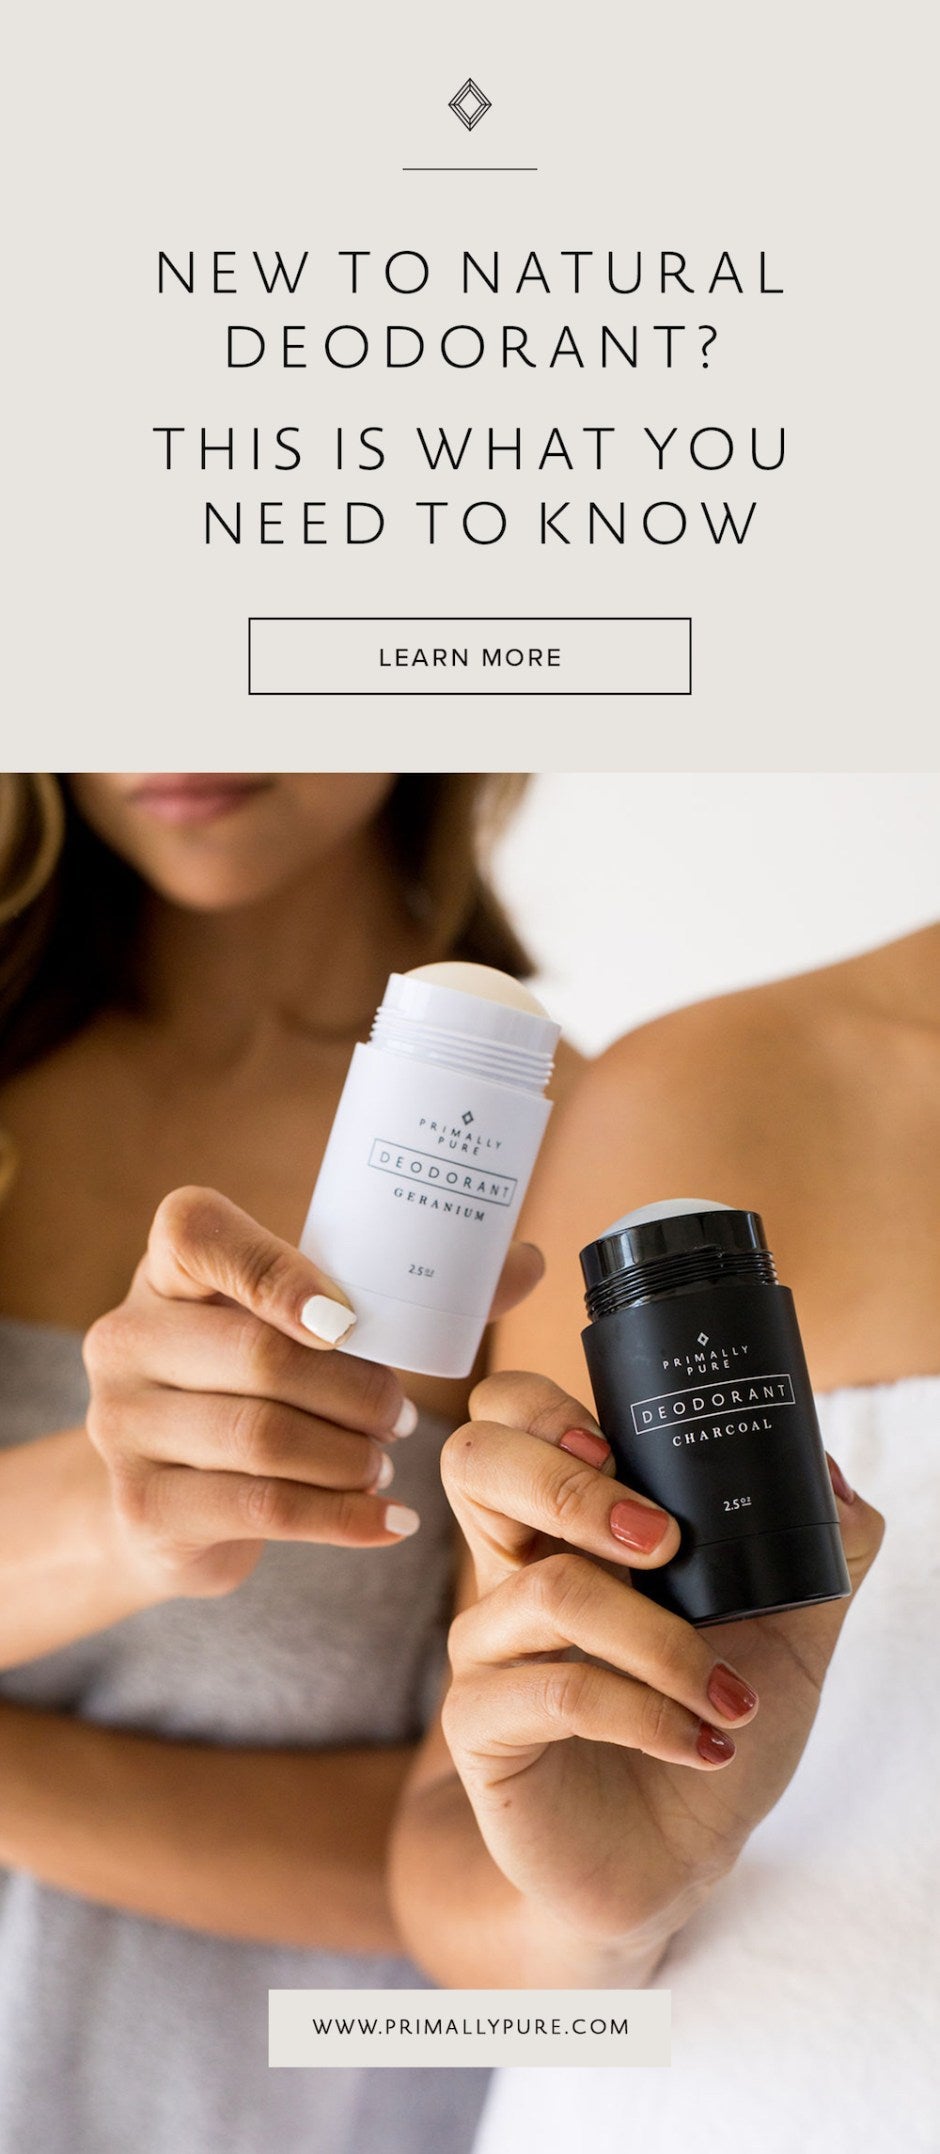 From ingredients, to sweating, to armpit rashes, we're spilling everything you need to know if you're new to natural deodorant. This post is a must-read! | Primally Pure Skincare